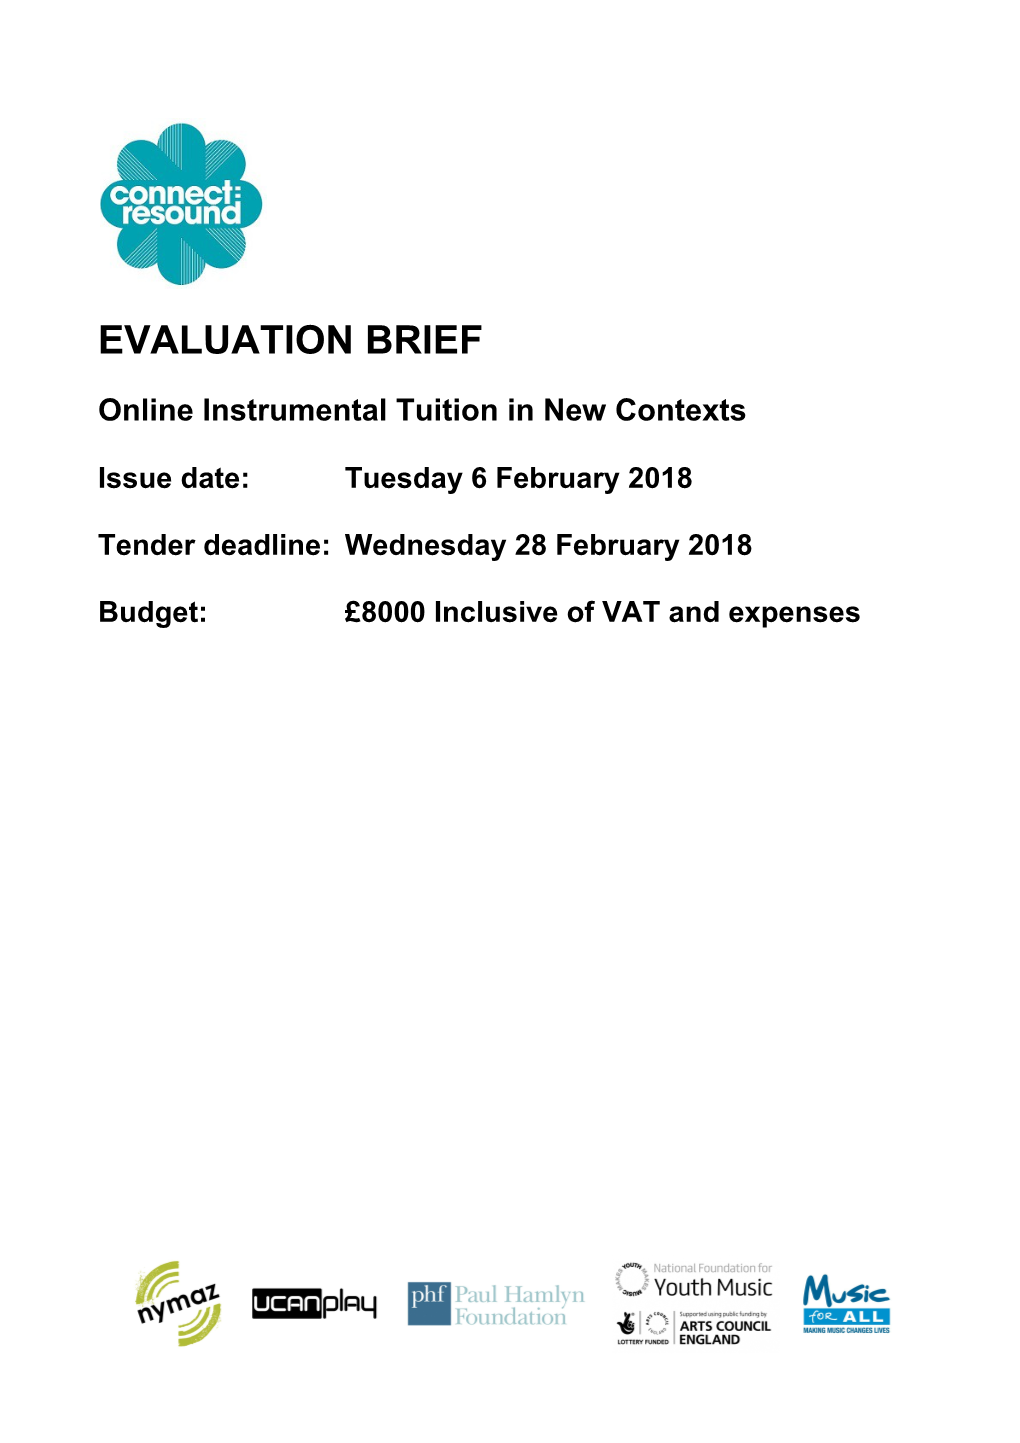 Online Instrumental Tuition in New Contexts